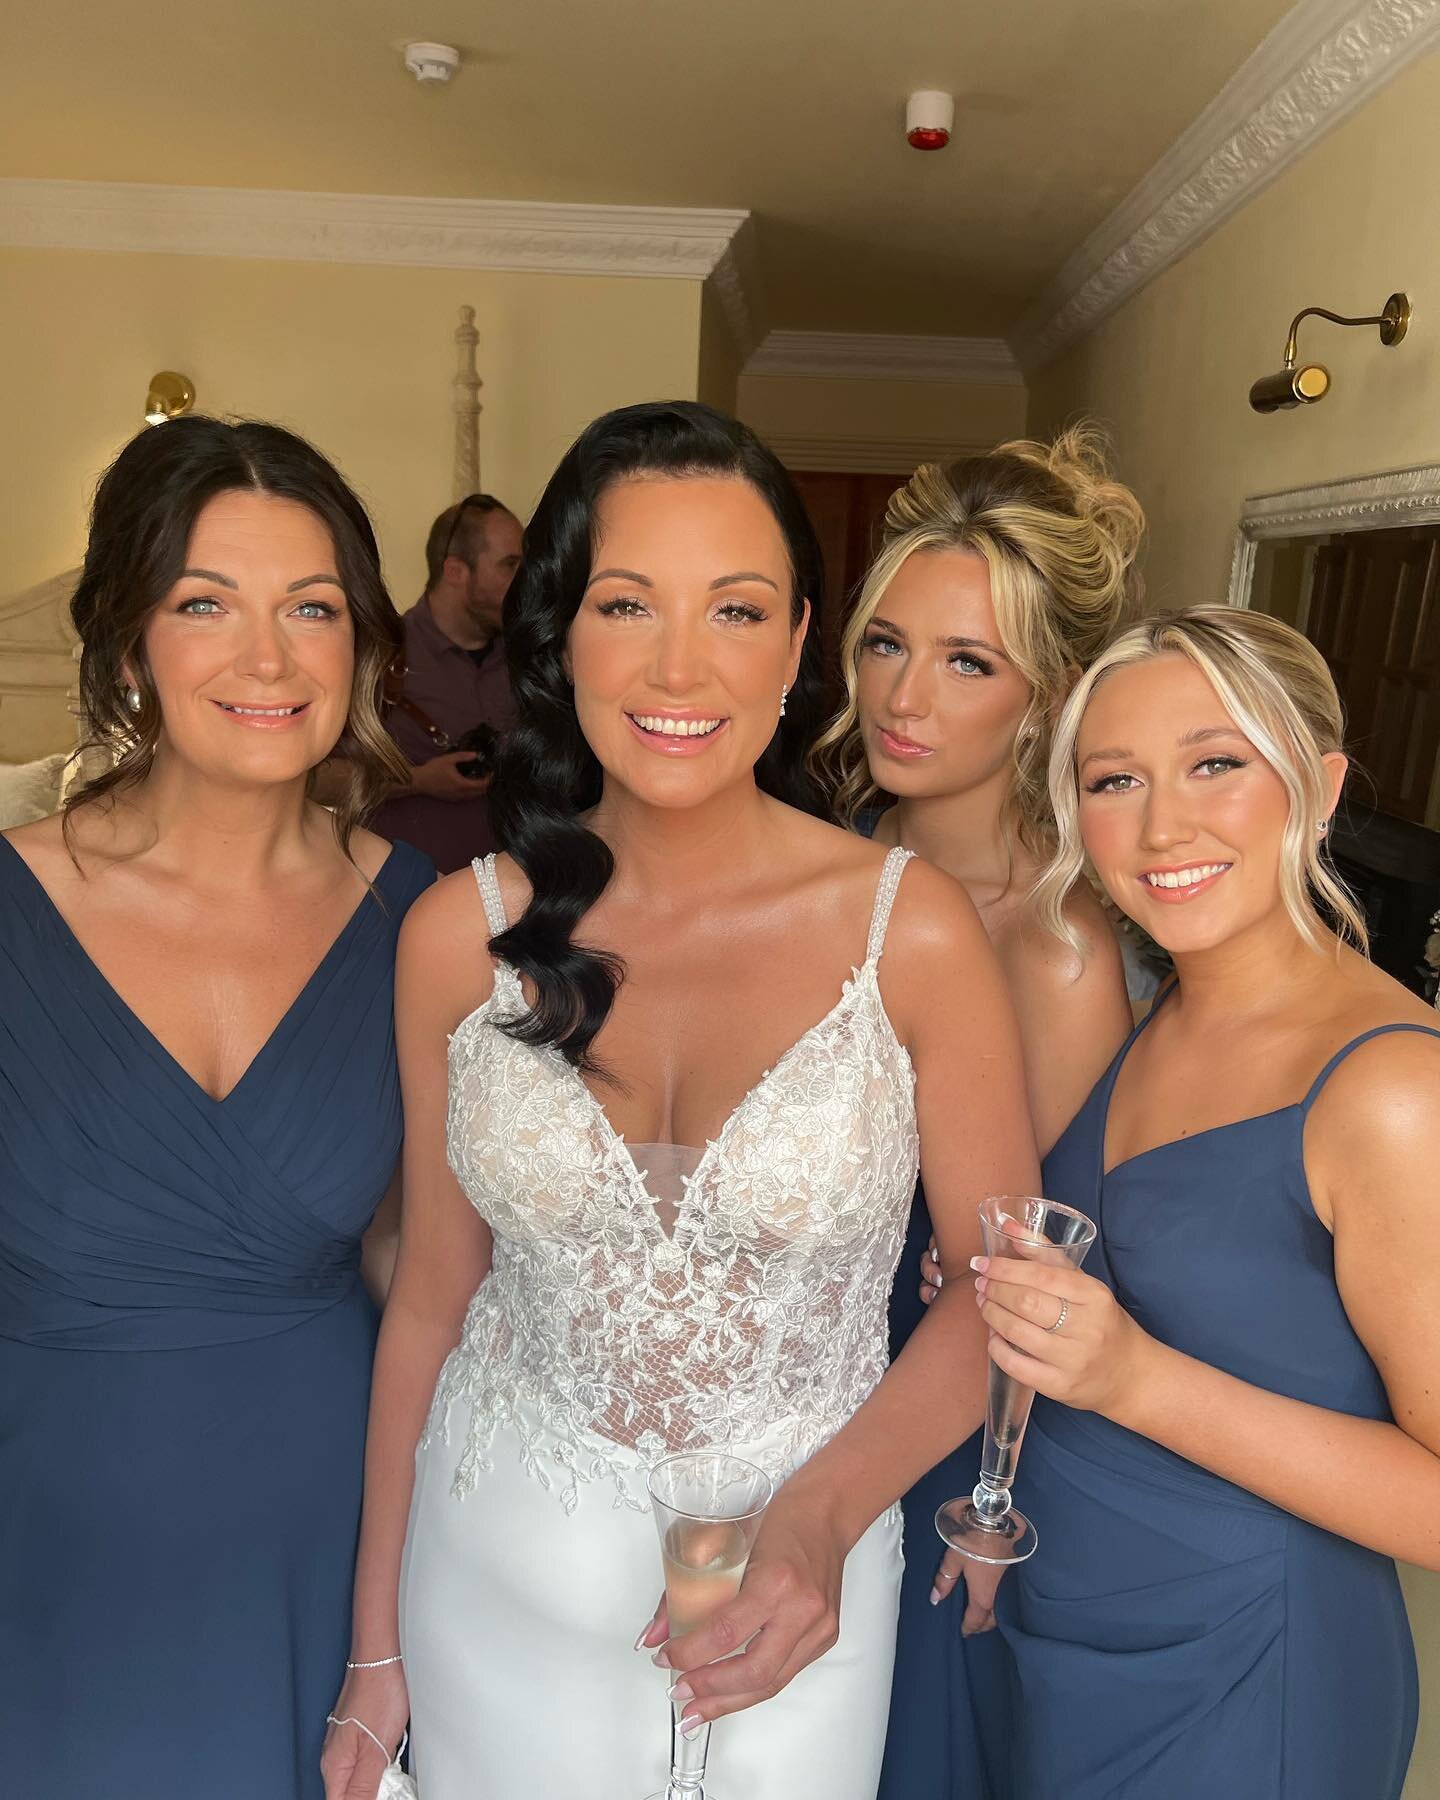 Jemma &amp; her ladies. Gorgeous bridal party with a twilight wedding which only means one thing longer to get ready and enjoy the morning with baubles. Was such a lovely busy morning with the lovely @weddinghairboutique starting at her studio and on